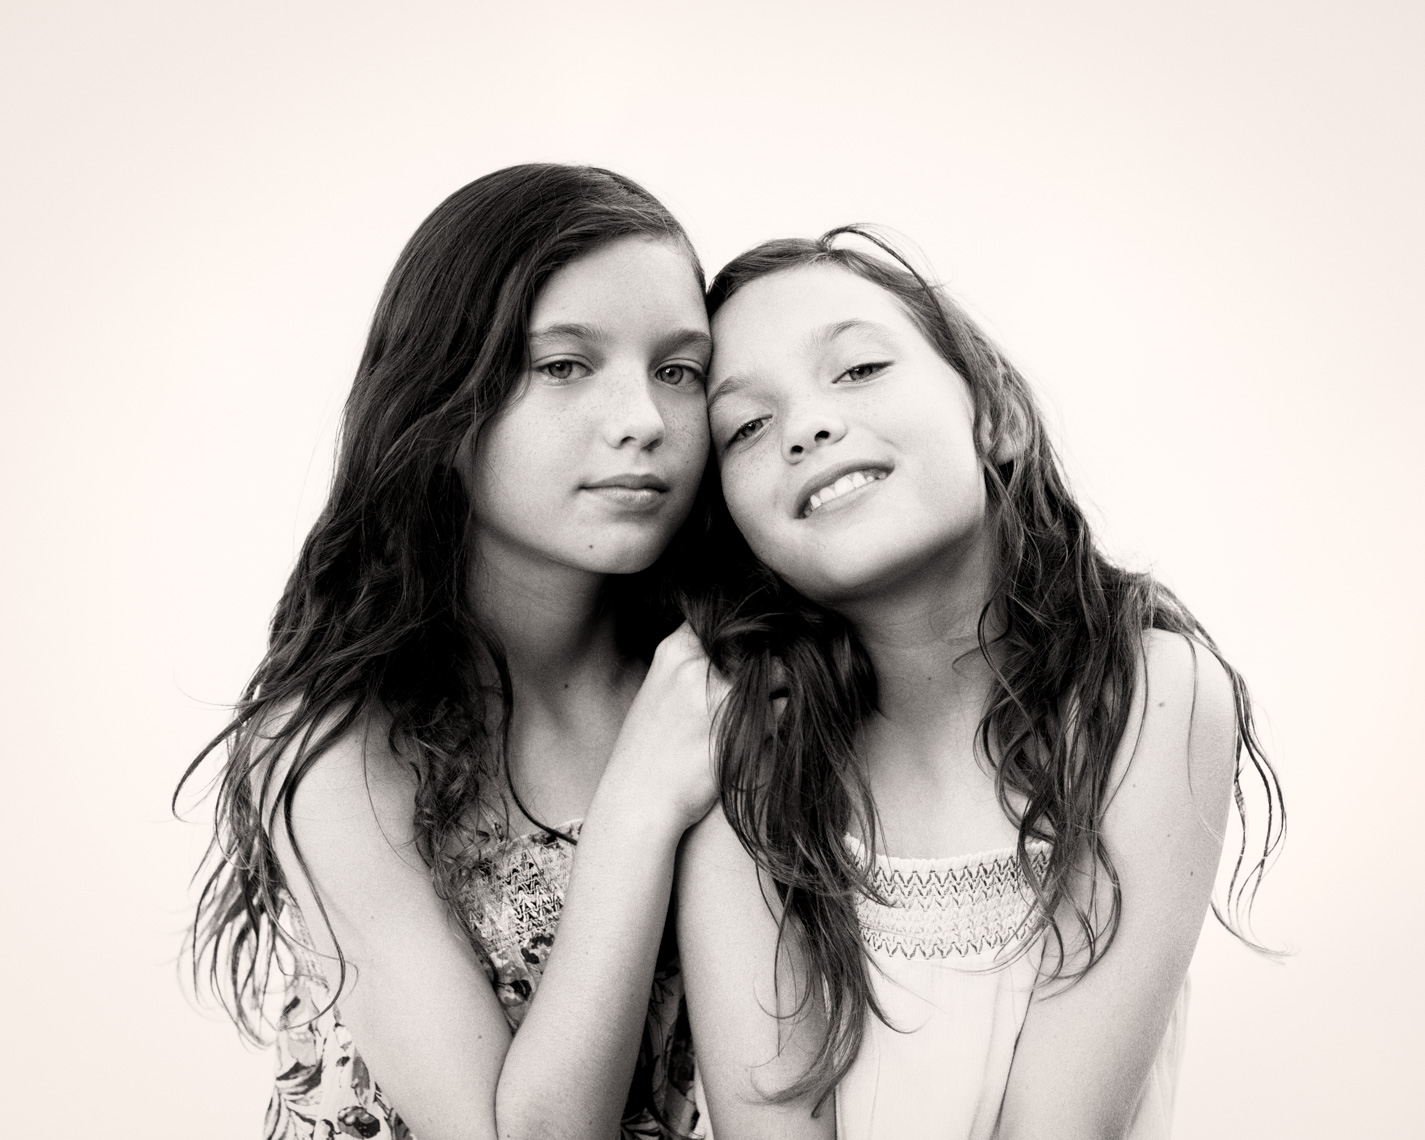 Young sisters caught moment | Austin Editorial Photographer